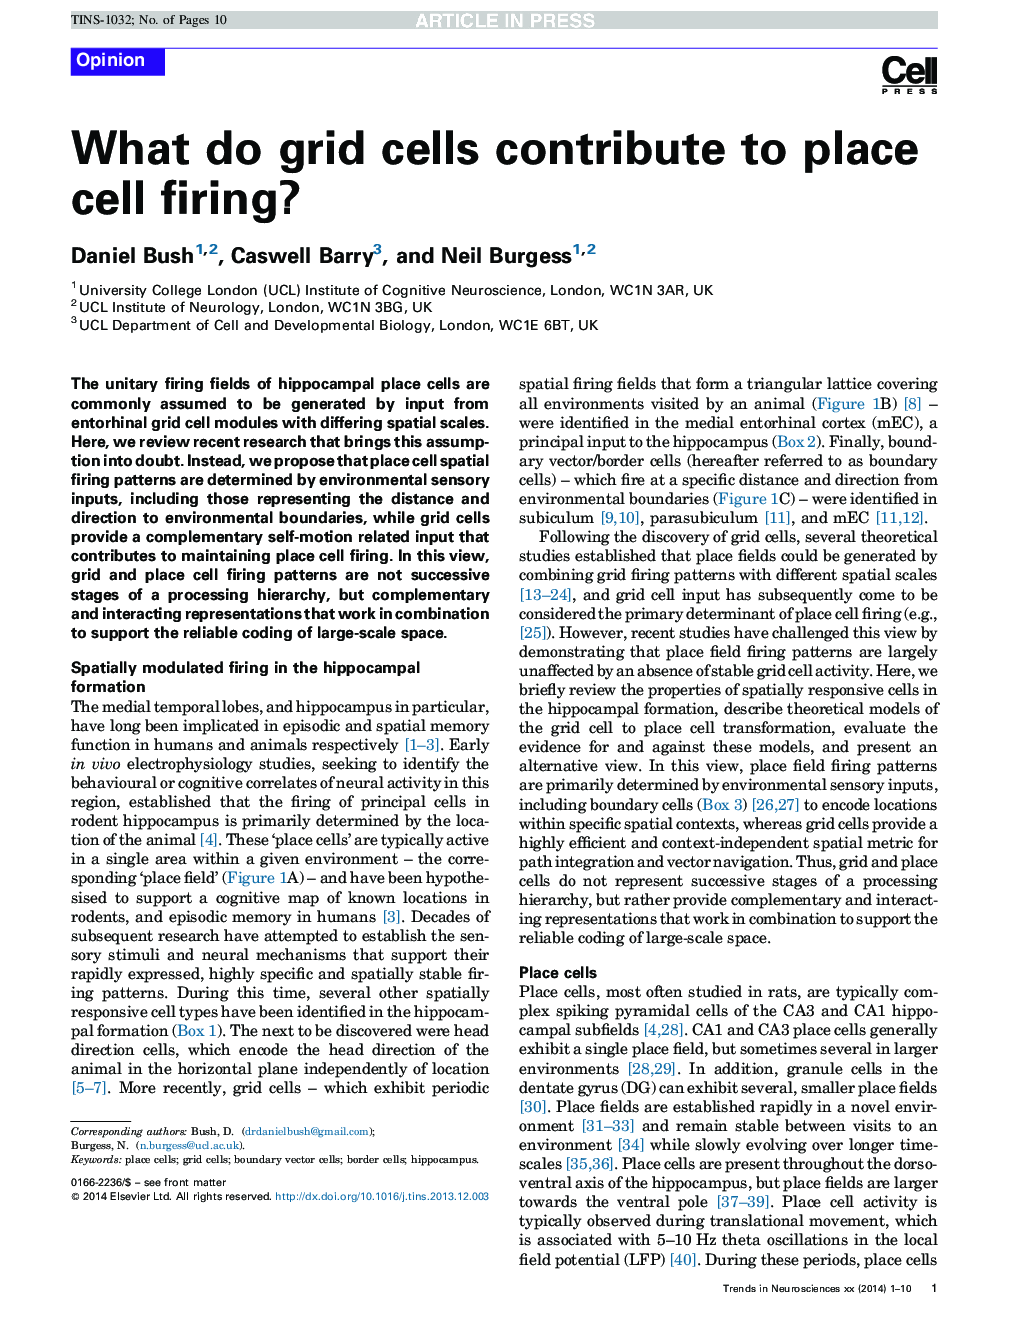 What do grid cells contribute to place cell firing?